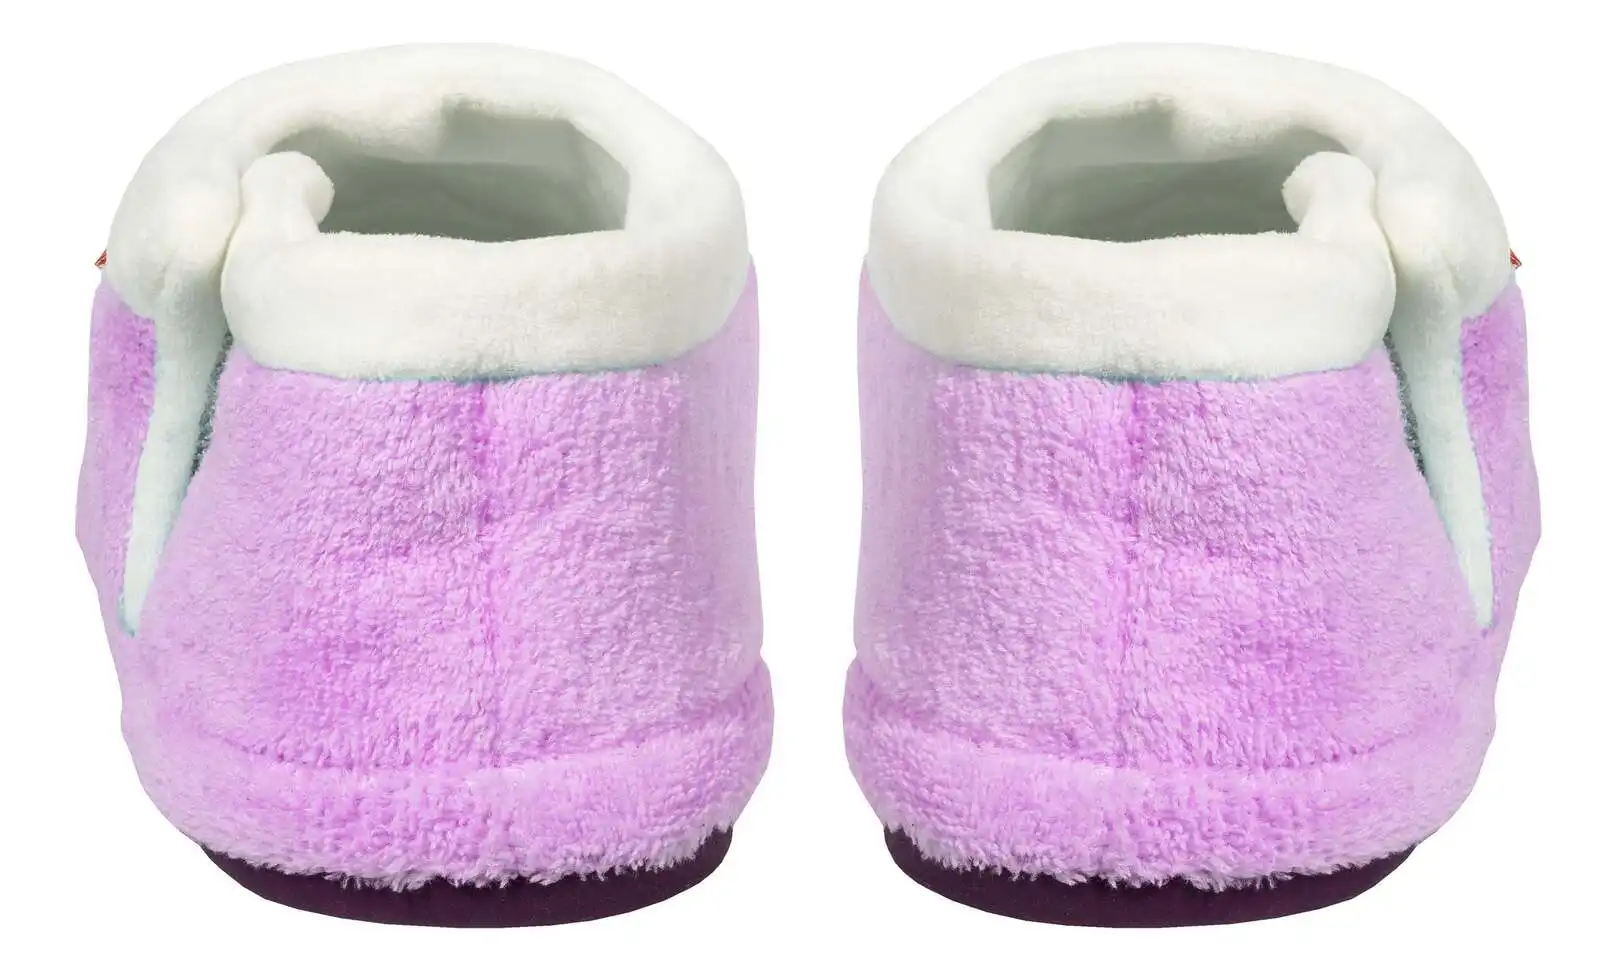 Archline Orthotic Slippers CLOSED Arch Scuffs Medical Pain Relief Moccasins - Lilac